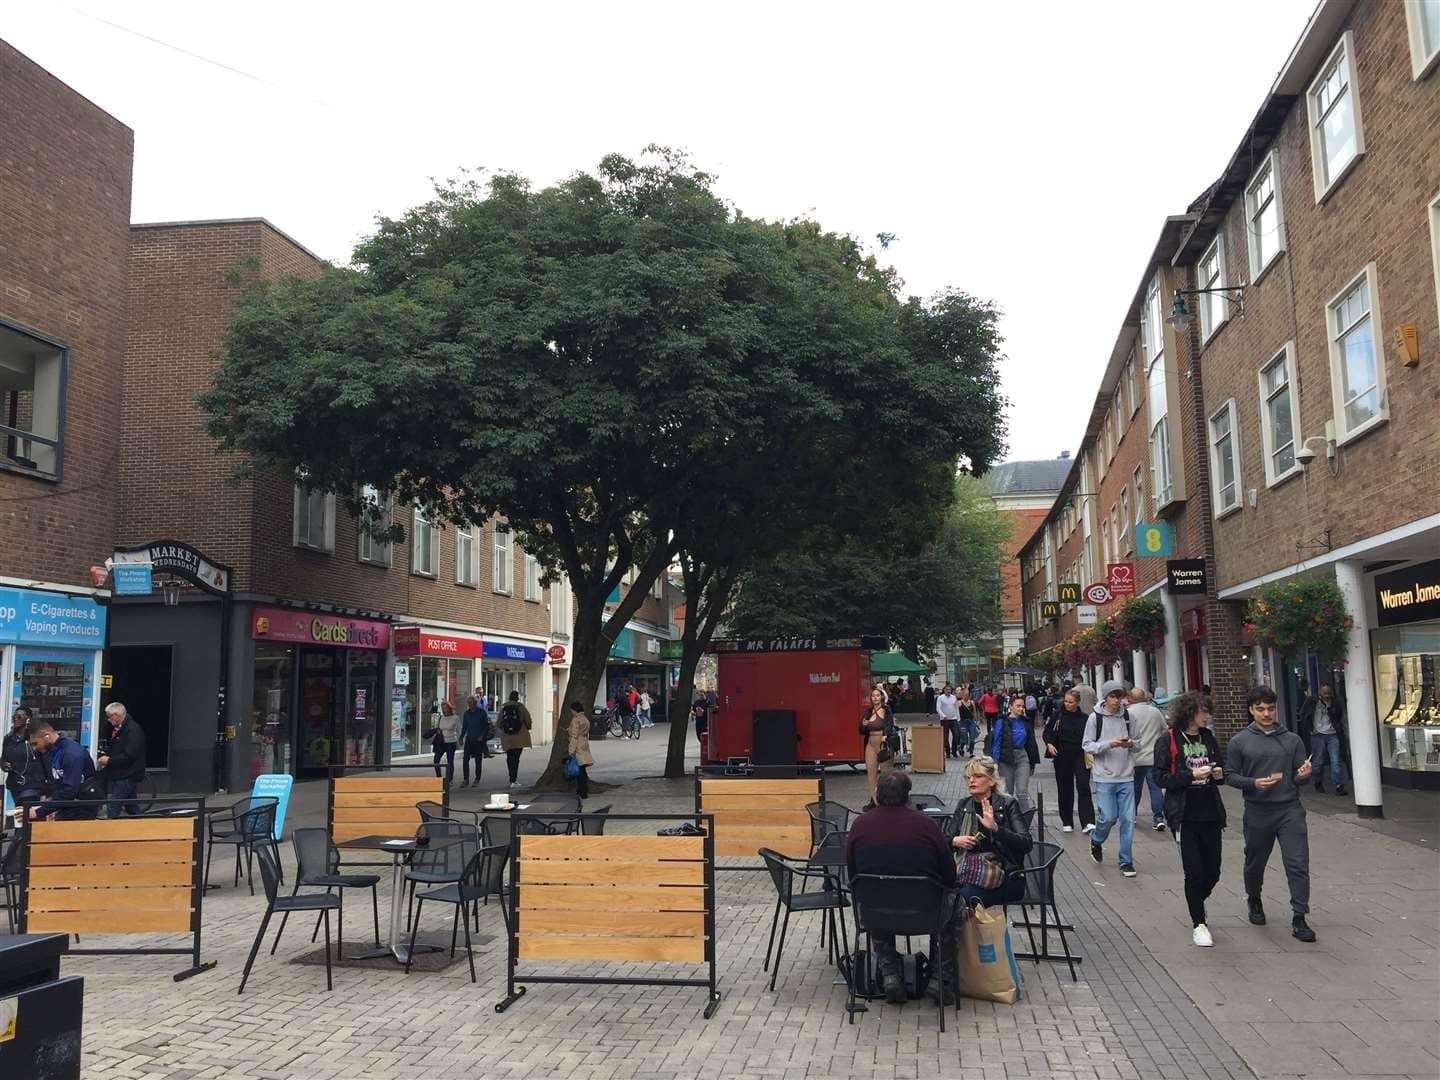 Some of the St George's Street trees that are due to be removed. Picture: Canterbury Labour Group/Facebook